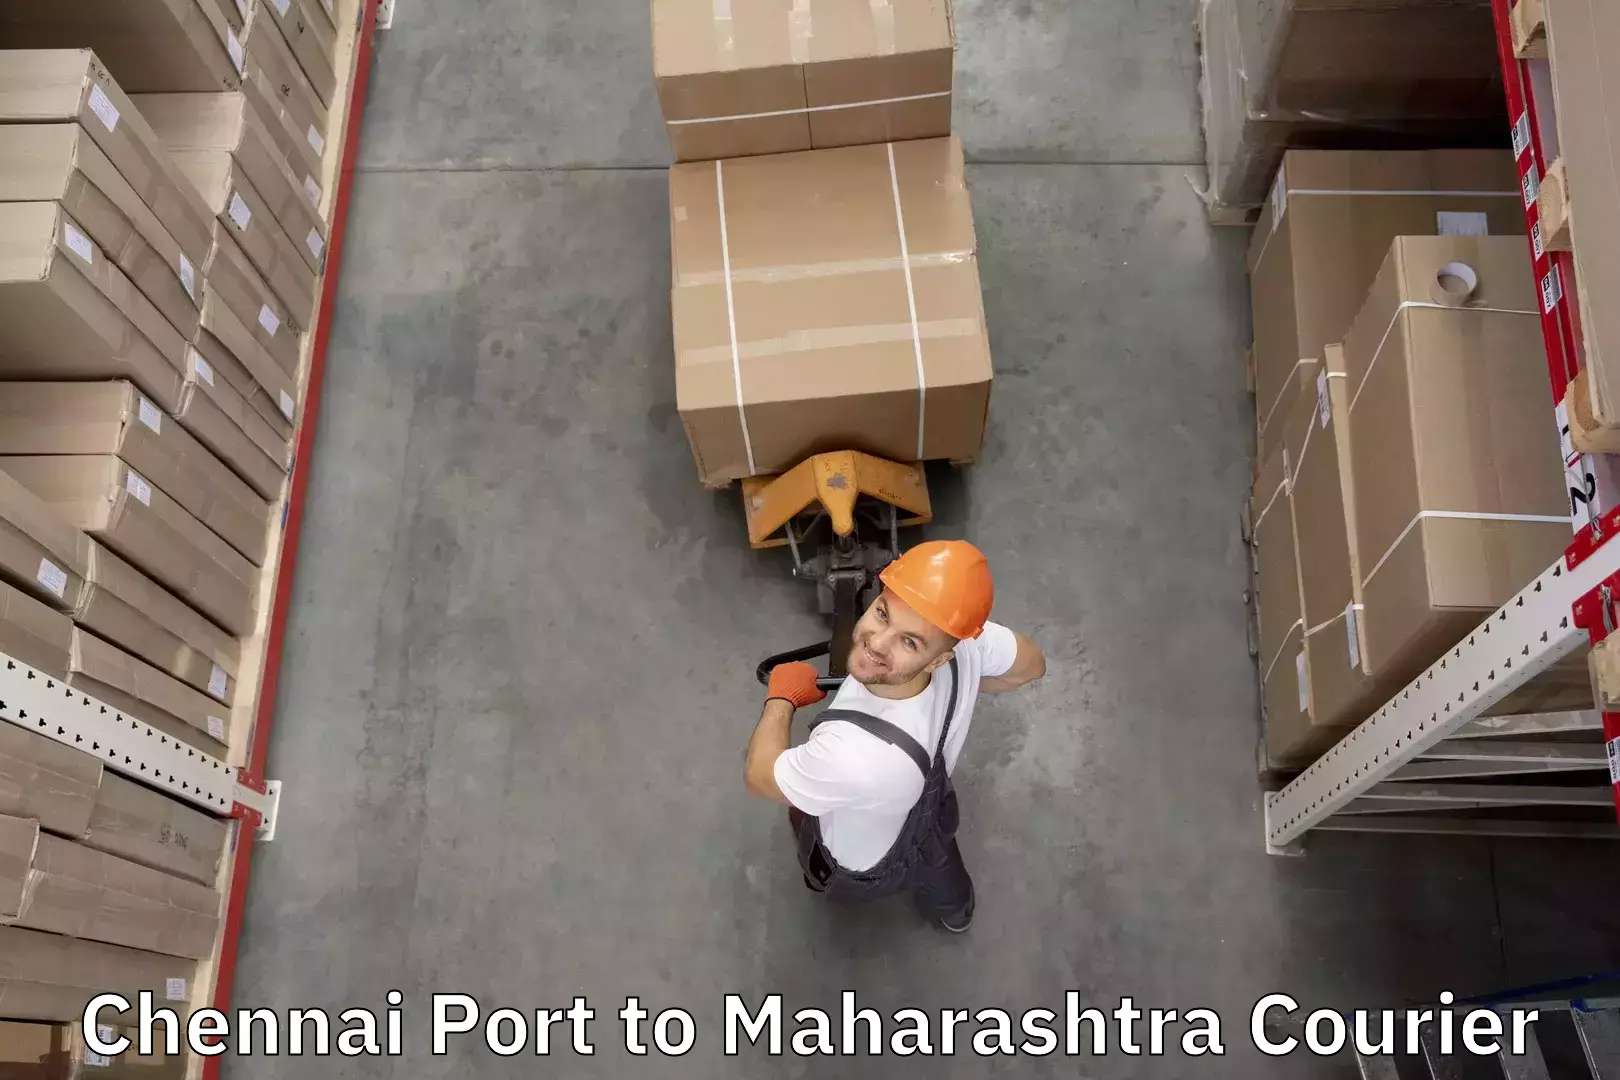 Door-to-door baggage service Chennai Port to Dharmabad